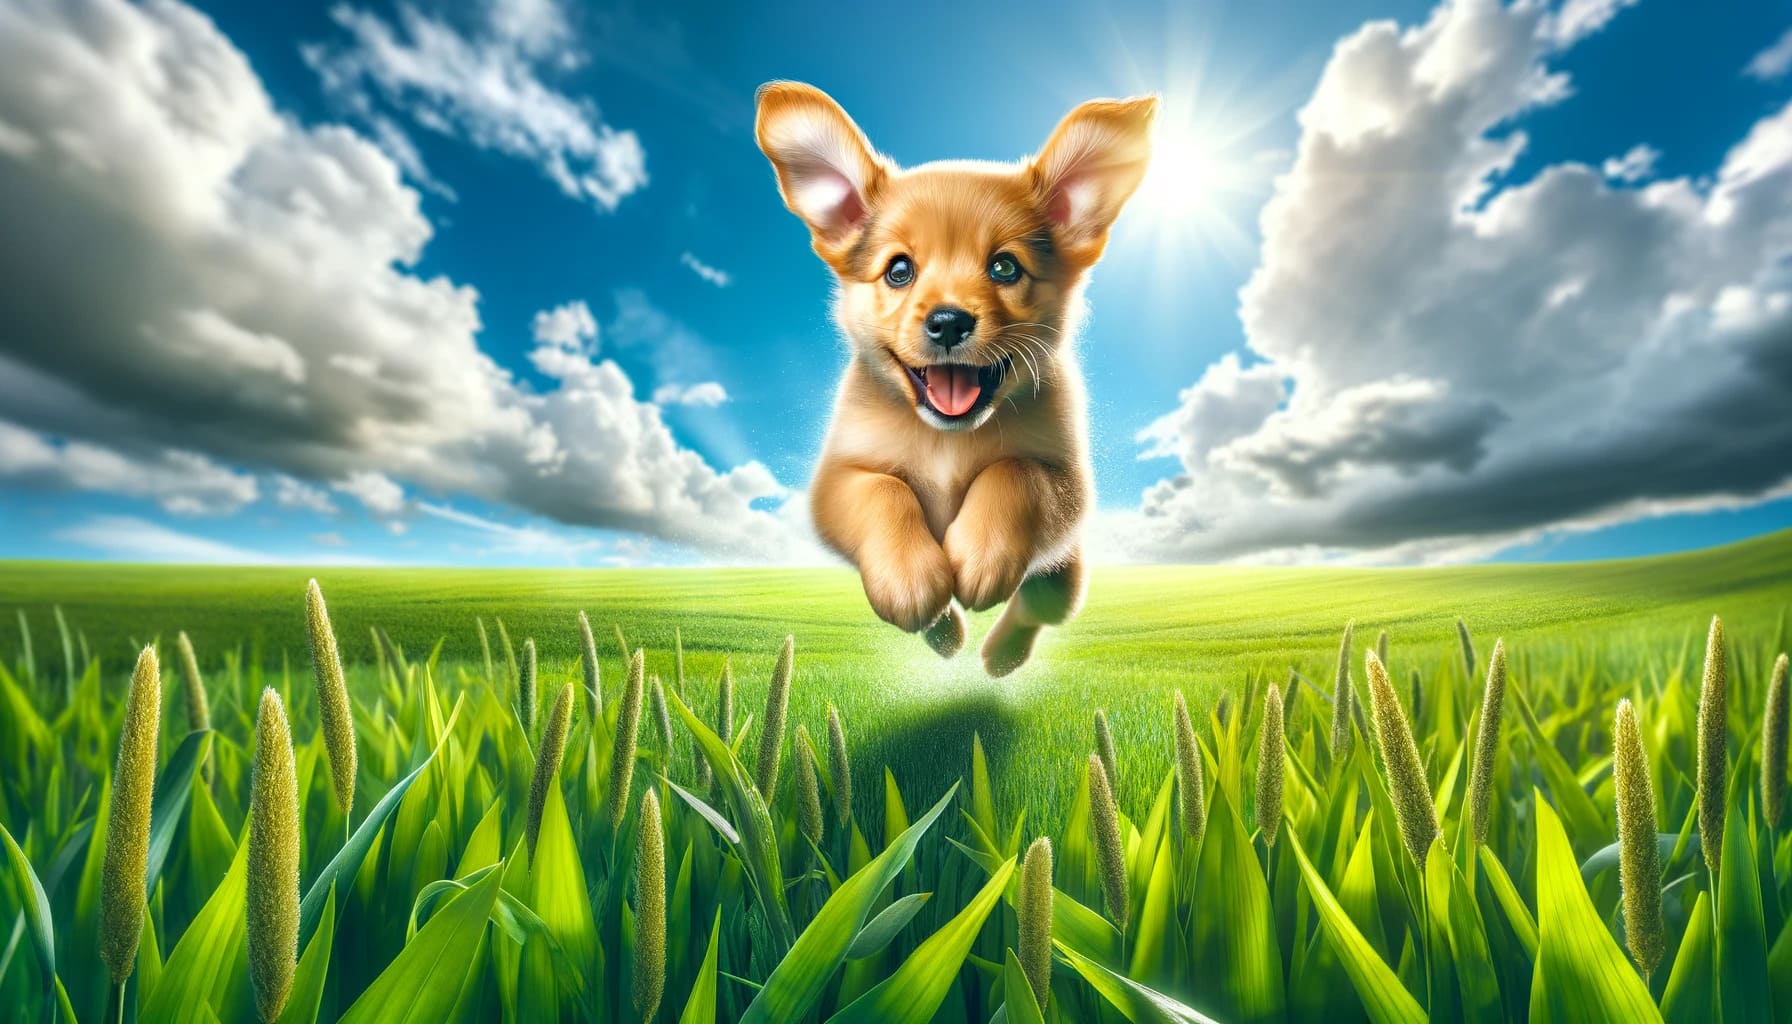 playful puppy in a lush green field symbolizing new beginnings and joy. The scene is set in an open field with vi